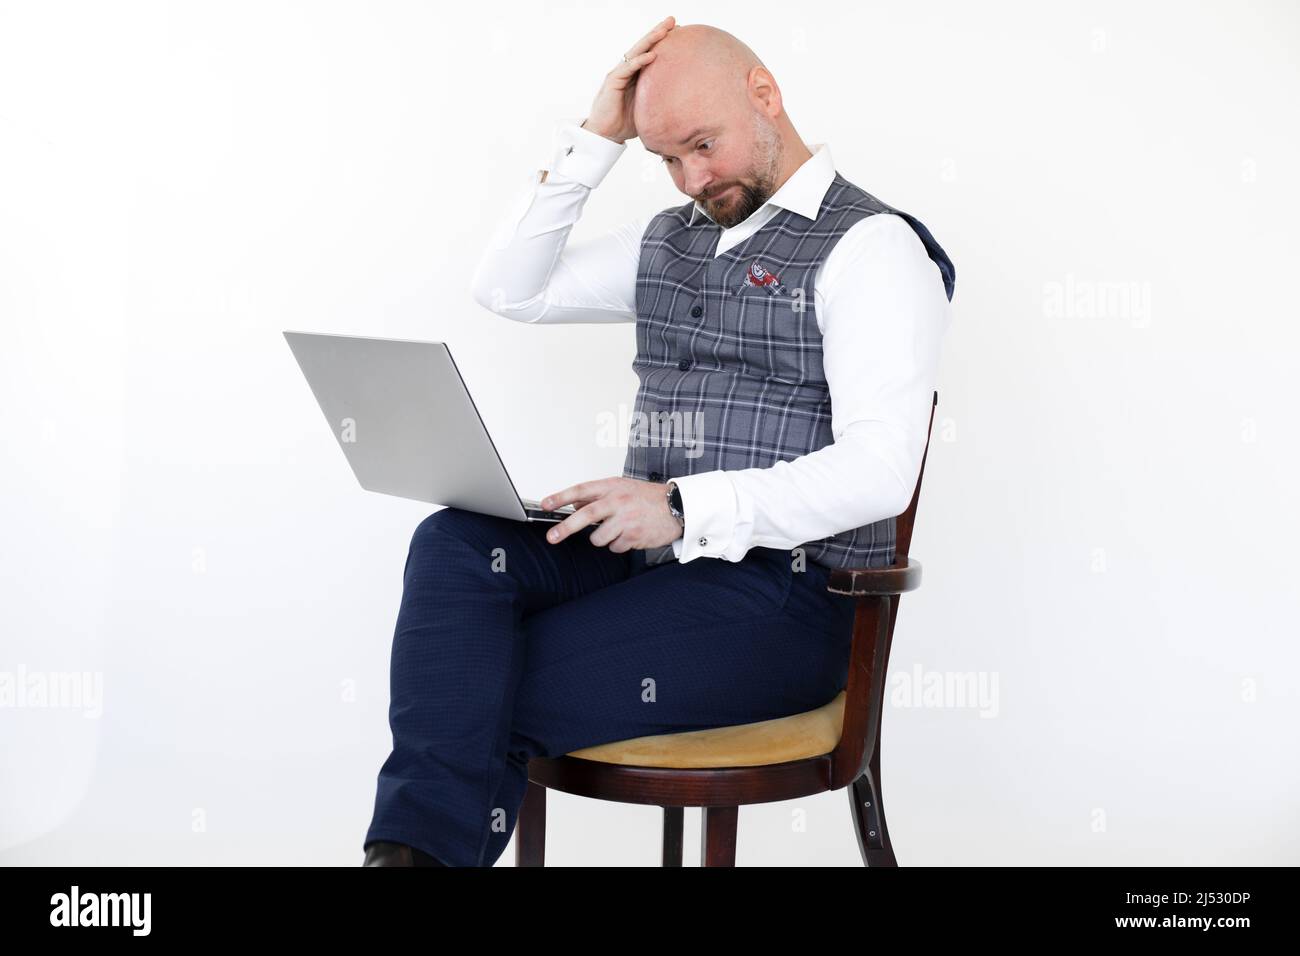 Portrait of bewildered middle-aged man in grey checkered vest, blue jeans, white shirt, sitting on chair holding laptop. Stock Photo